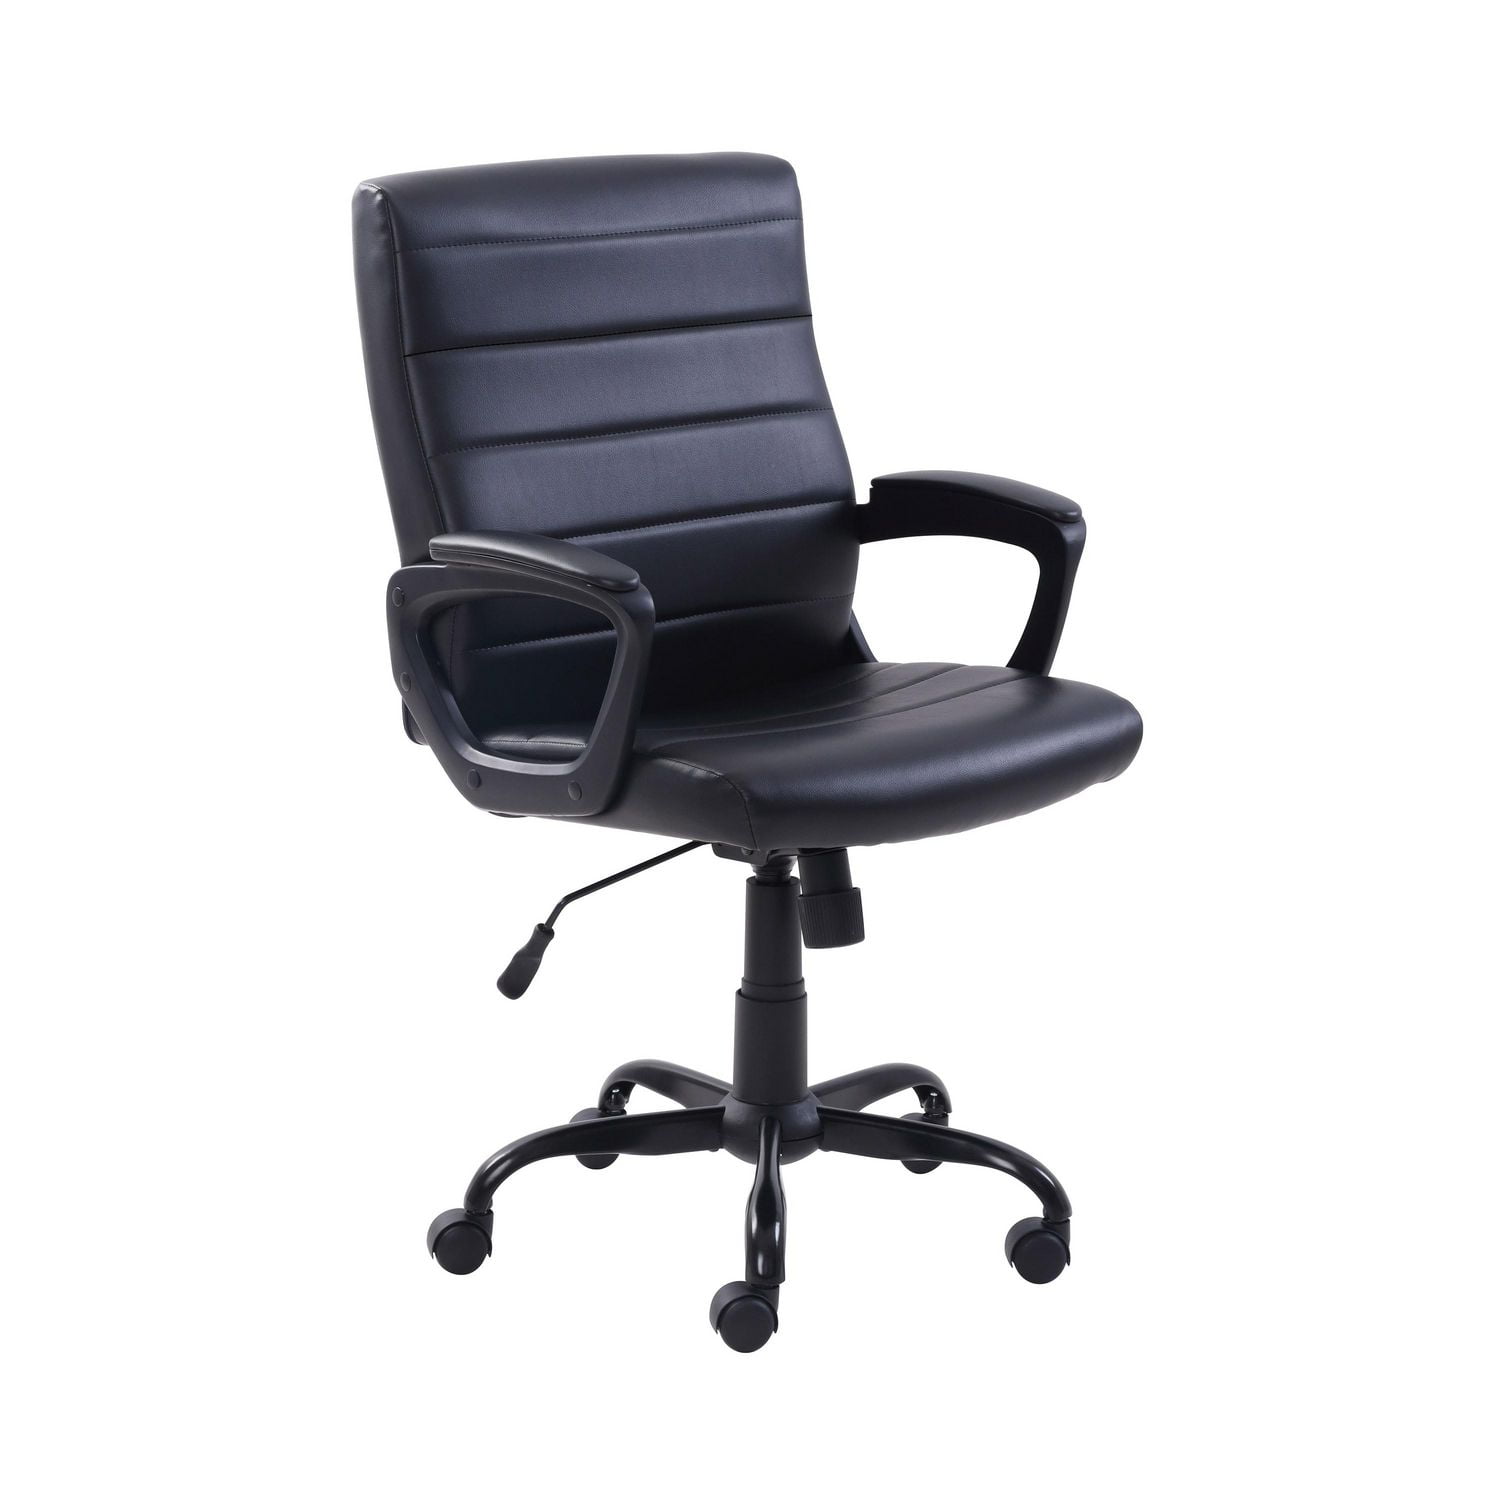 Mainstays Bonded Leather Mid-Back Manager's Office Chair, Bonded